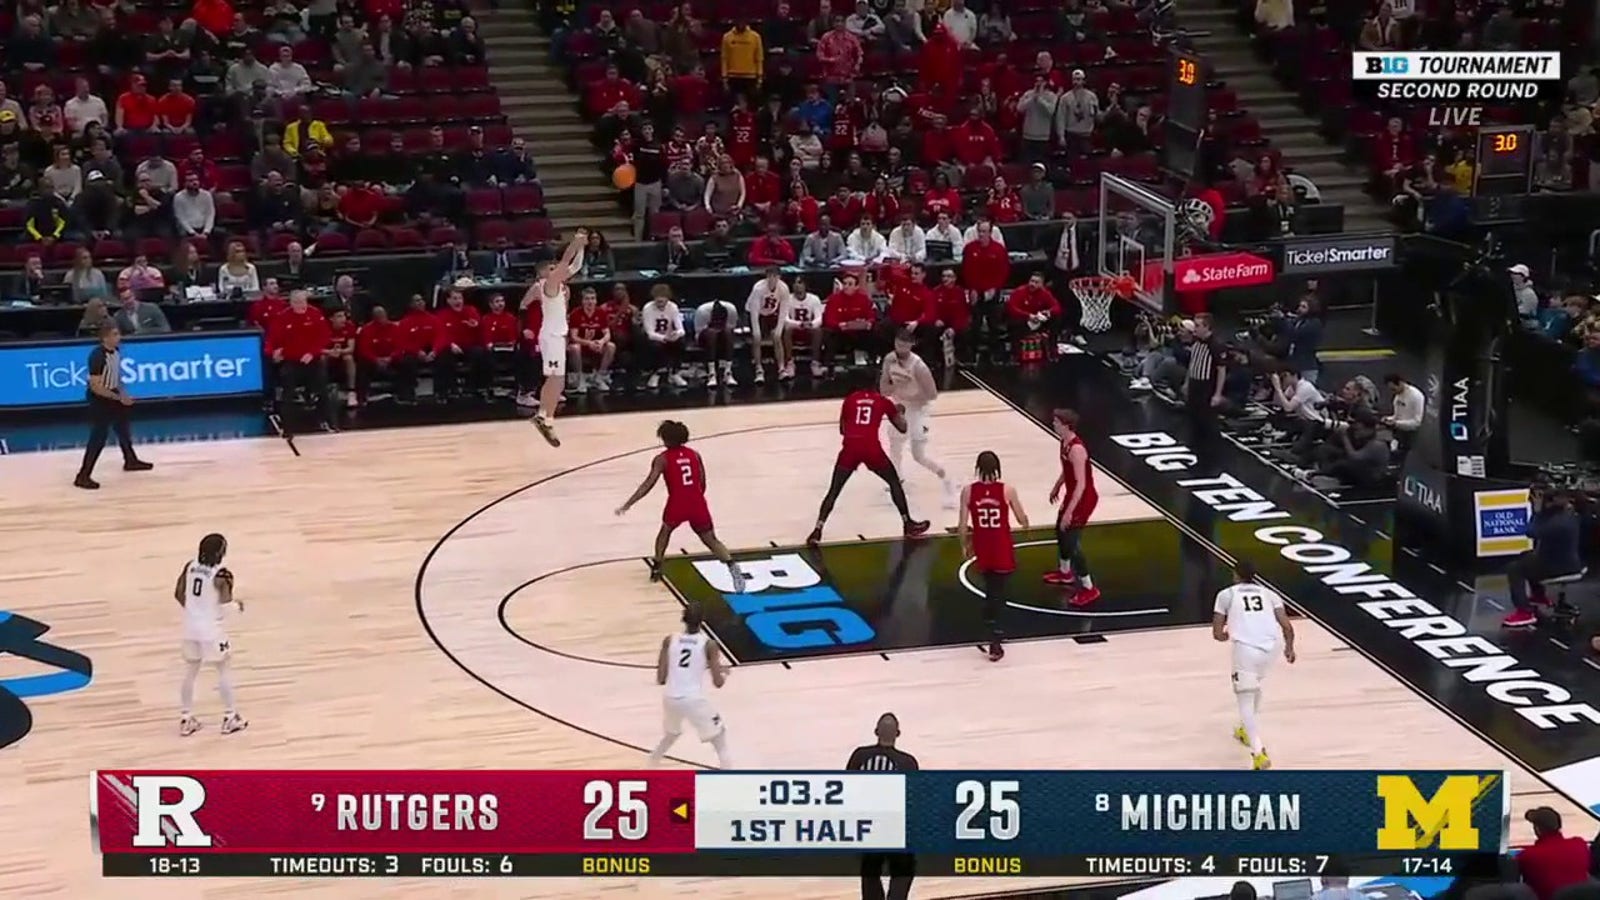 Michigan's Joey Baker hits 3-point buzzer-beater to end the half vs. Rutgers